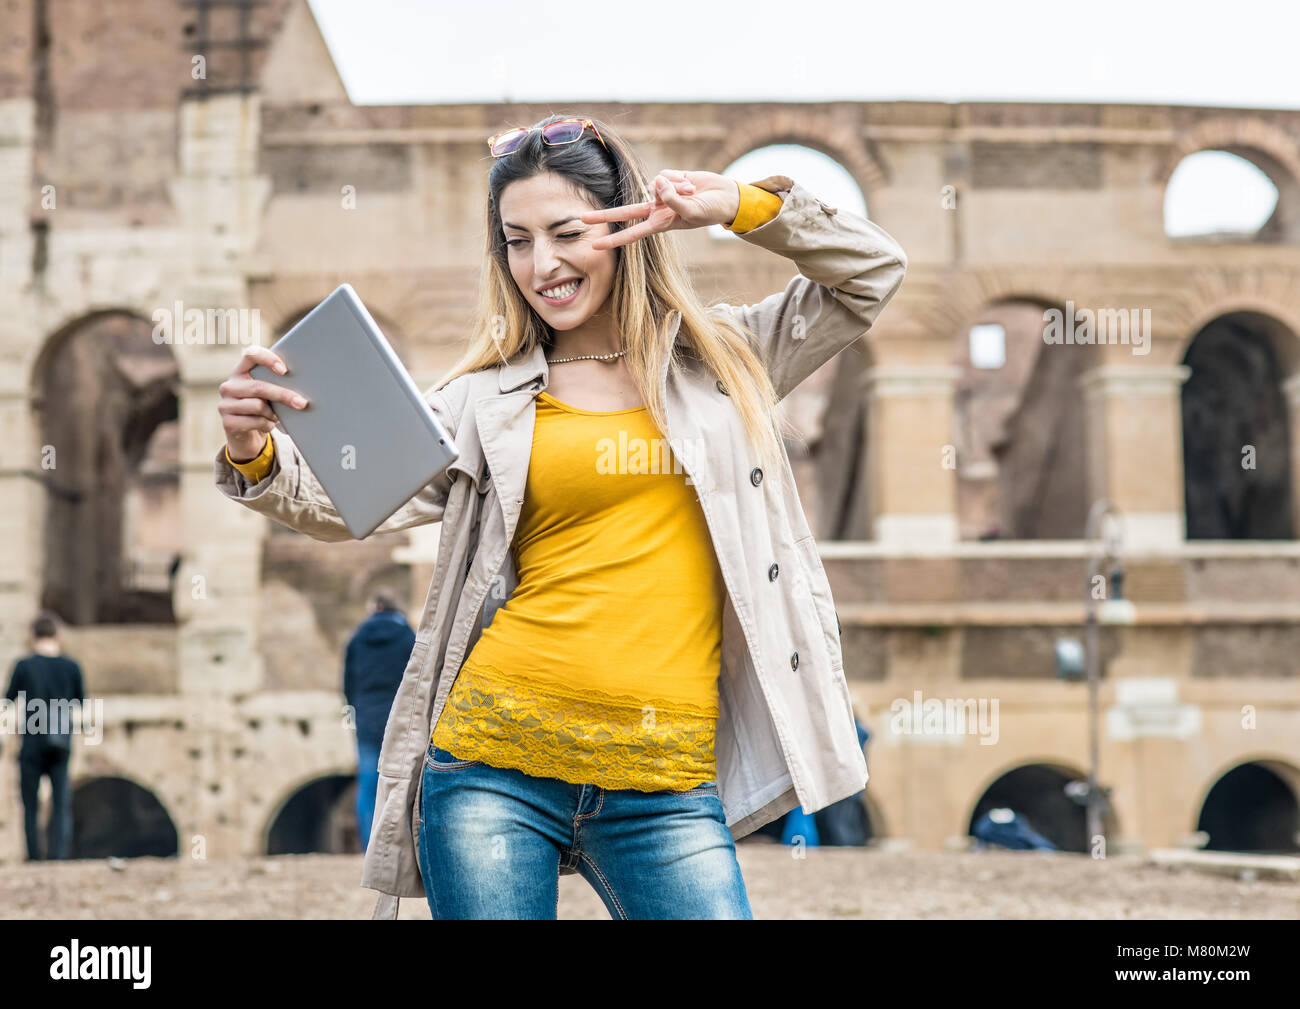 Young pretty tourist woman smiling doing self portrait, in background Colosseum monument in Rome Italy Stock Photo